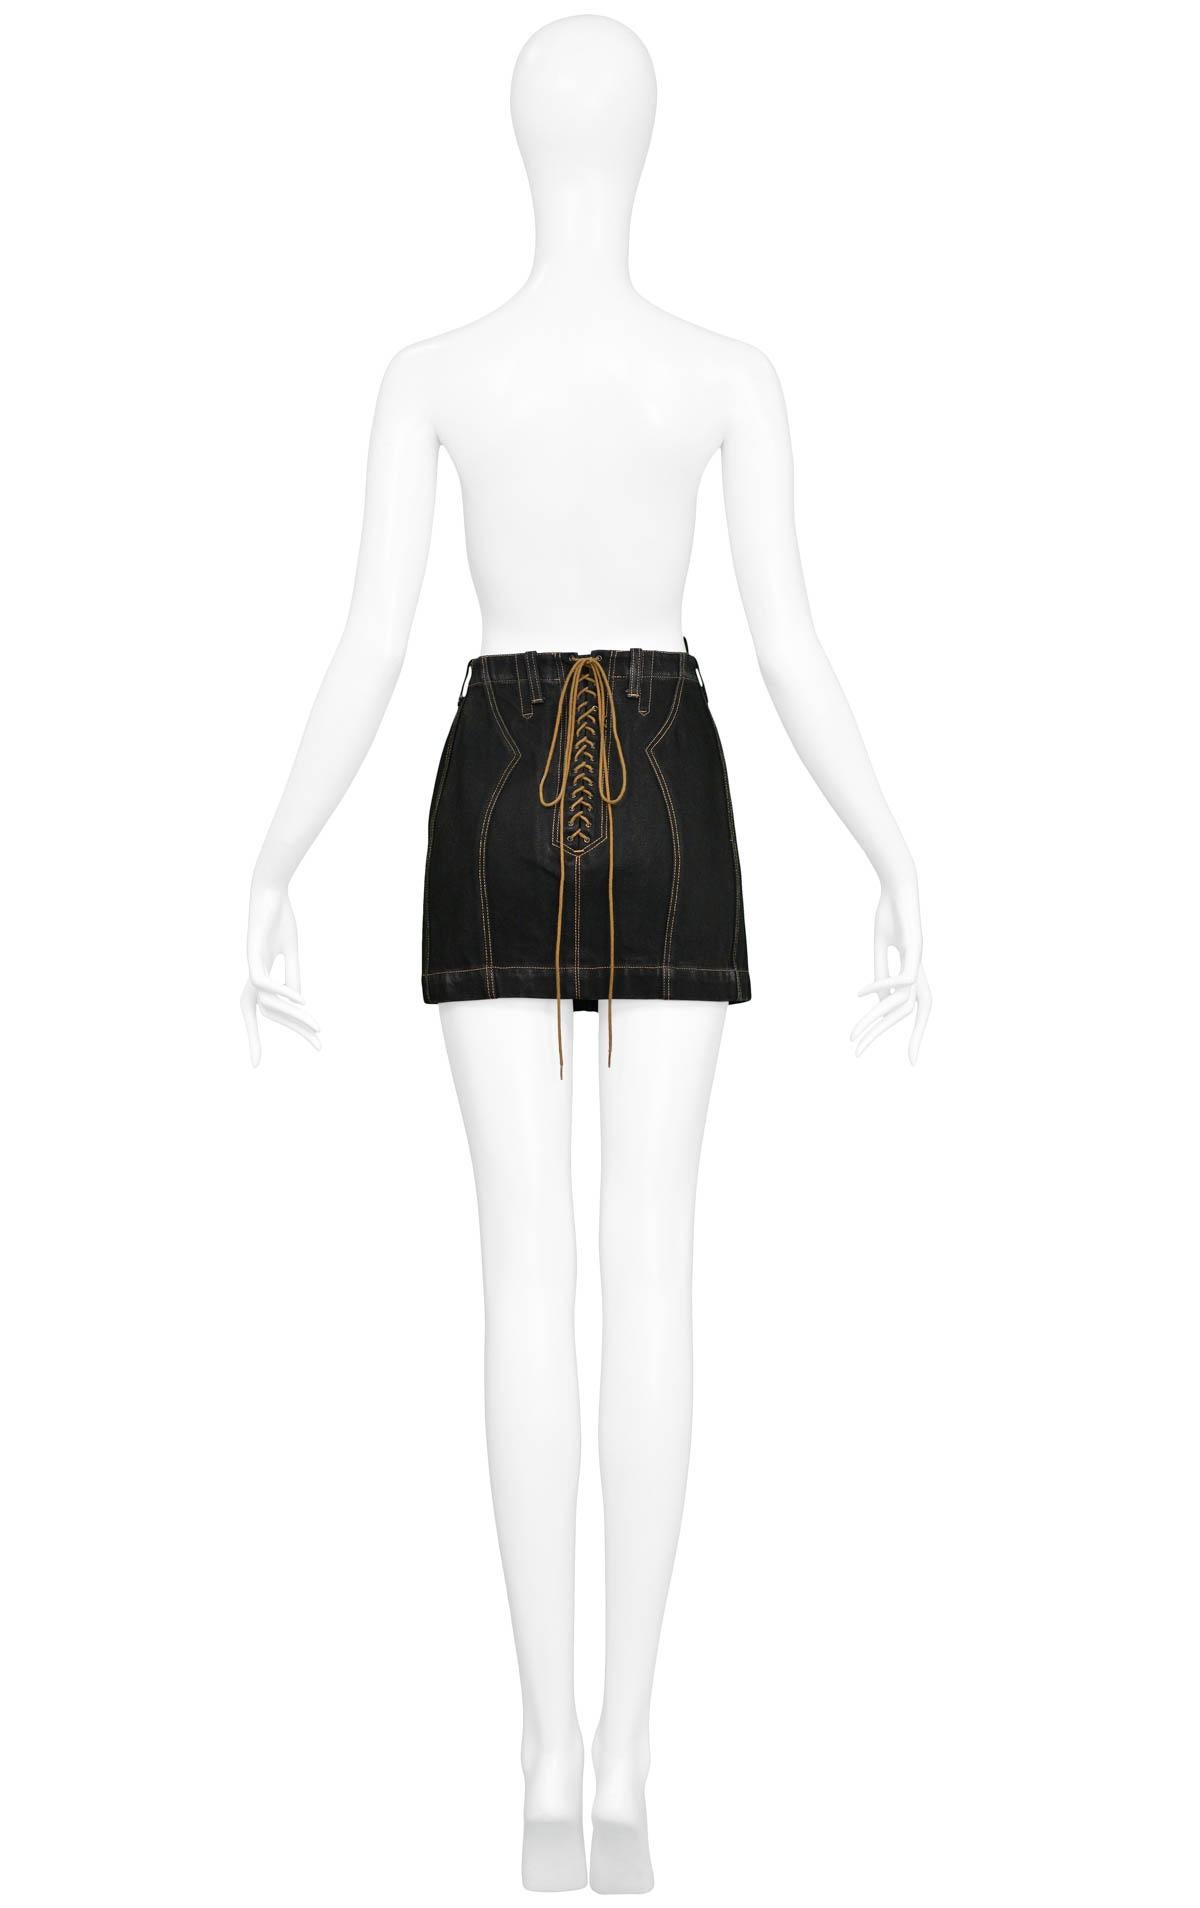 Vintage Azzedine Alaia dark denim structured mini skirt featuring cotton corset lace up detail at back & exposed stitching. 1991 Collection.

Excellent Condition.

Size: Small